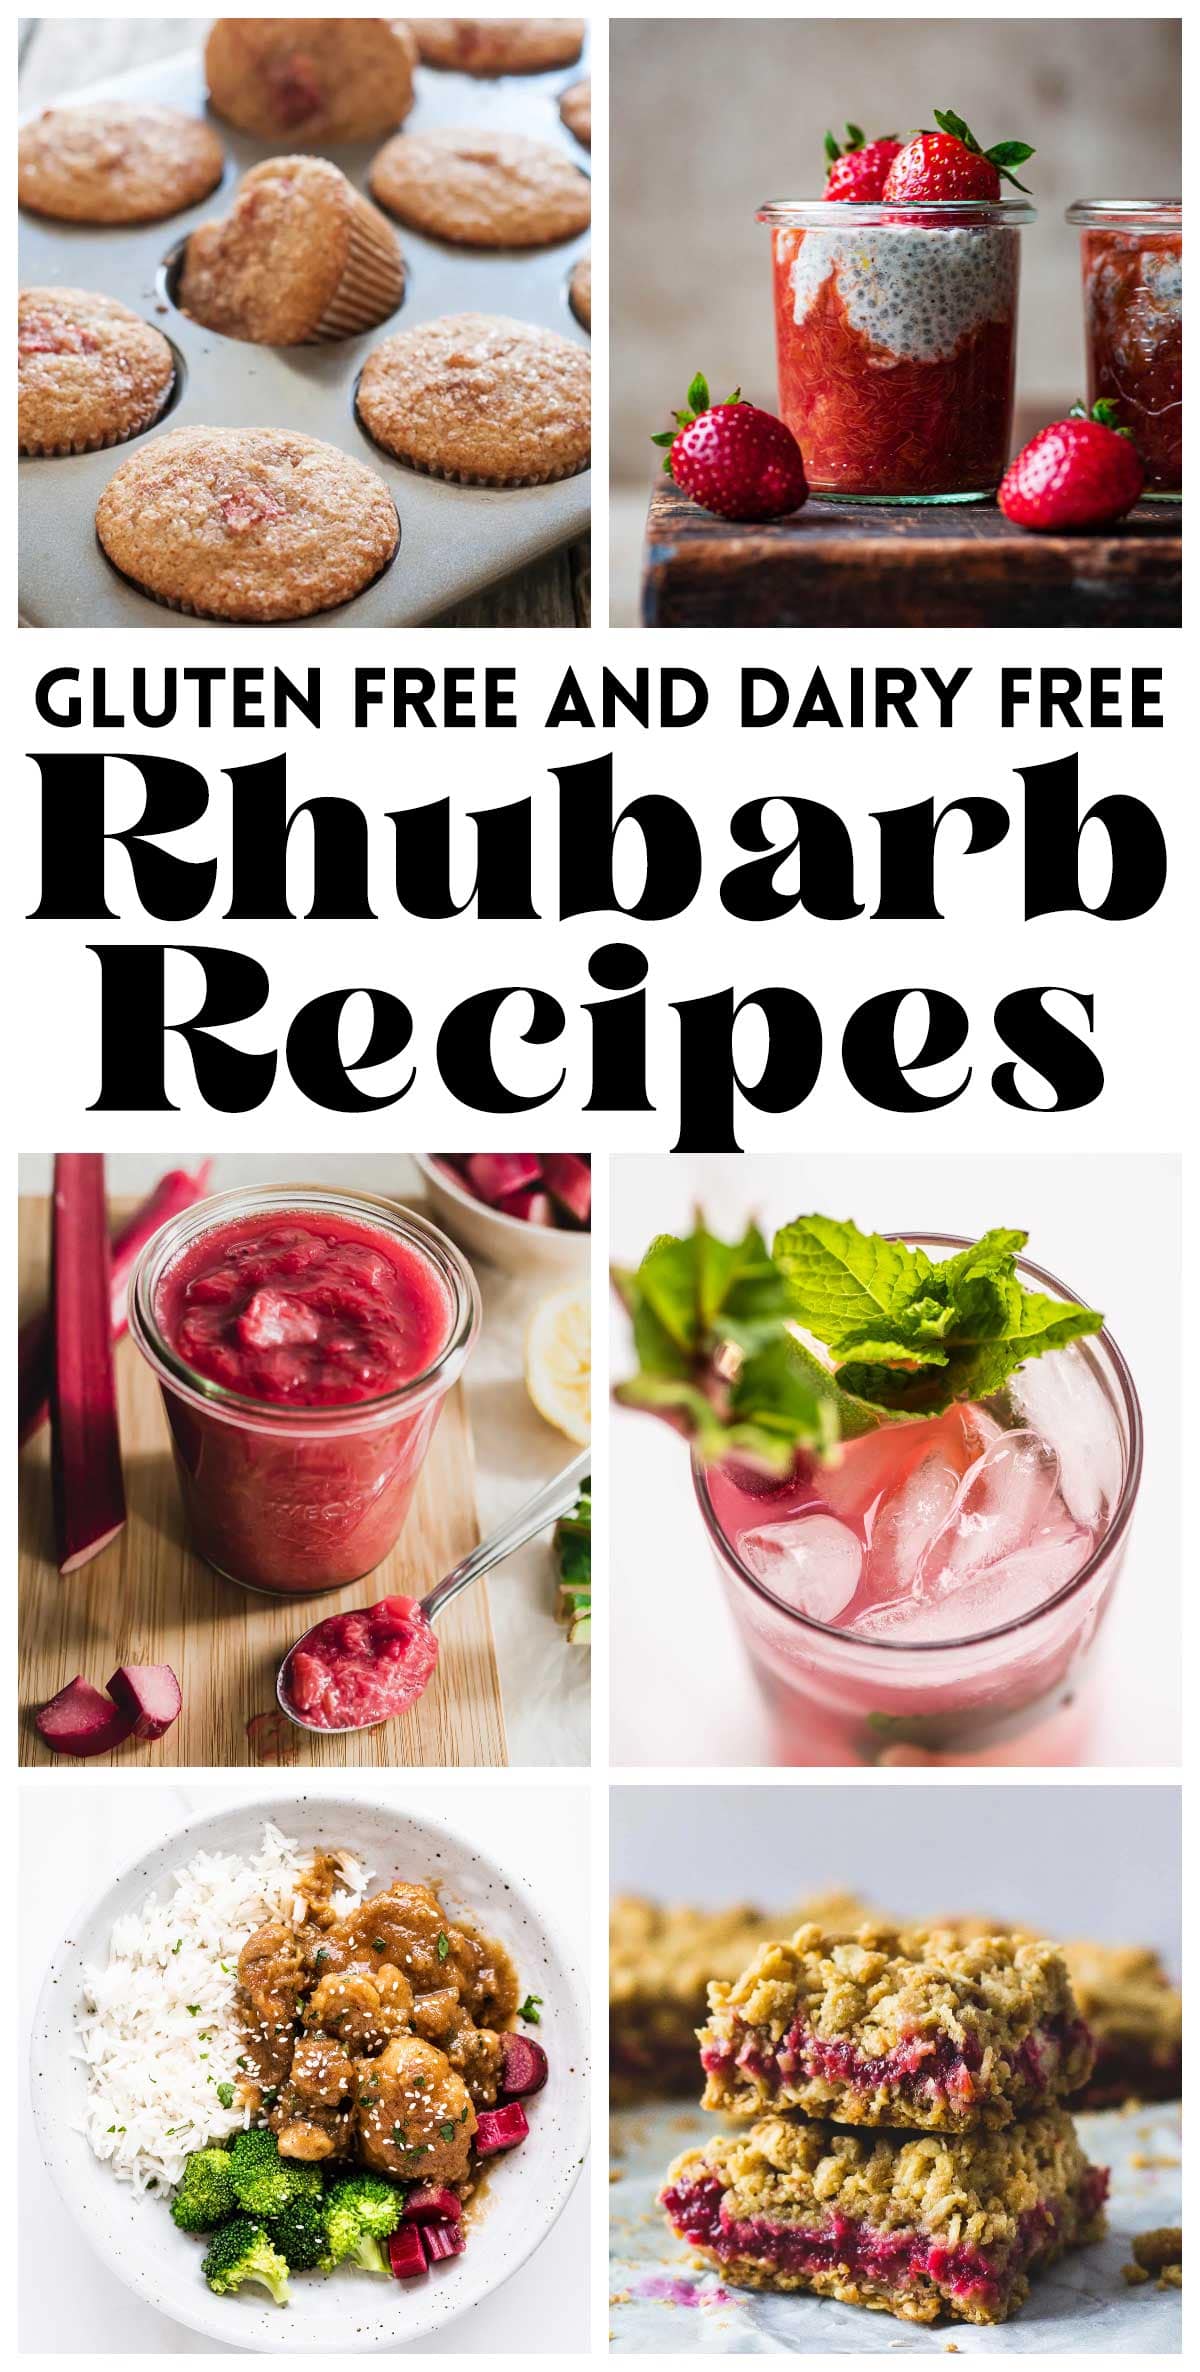 photo collage with various recipes for rhubarb with text overlay that says "gluten free and dairy free rhubarb recipes".